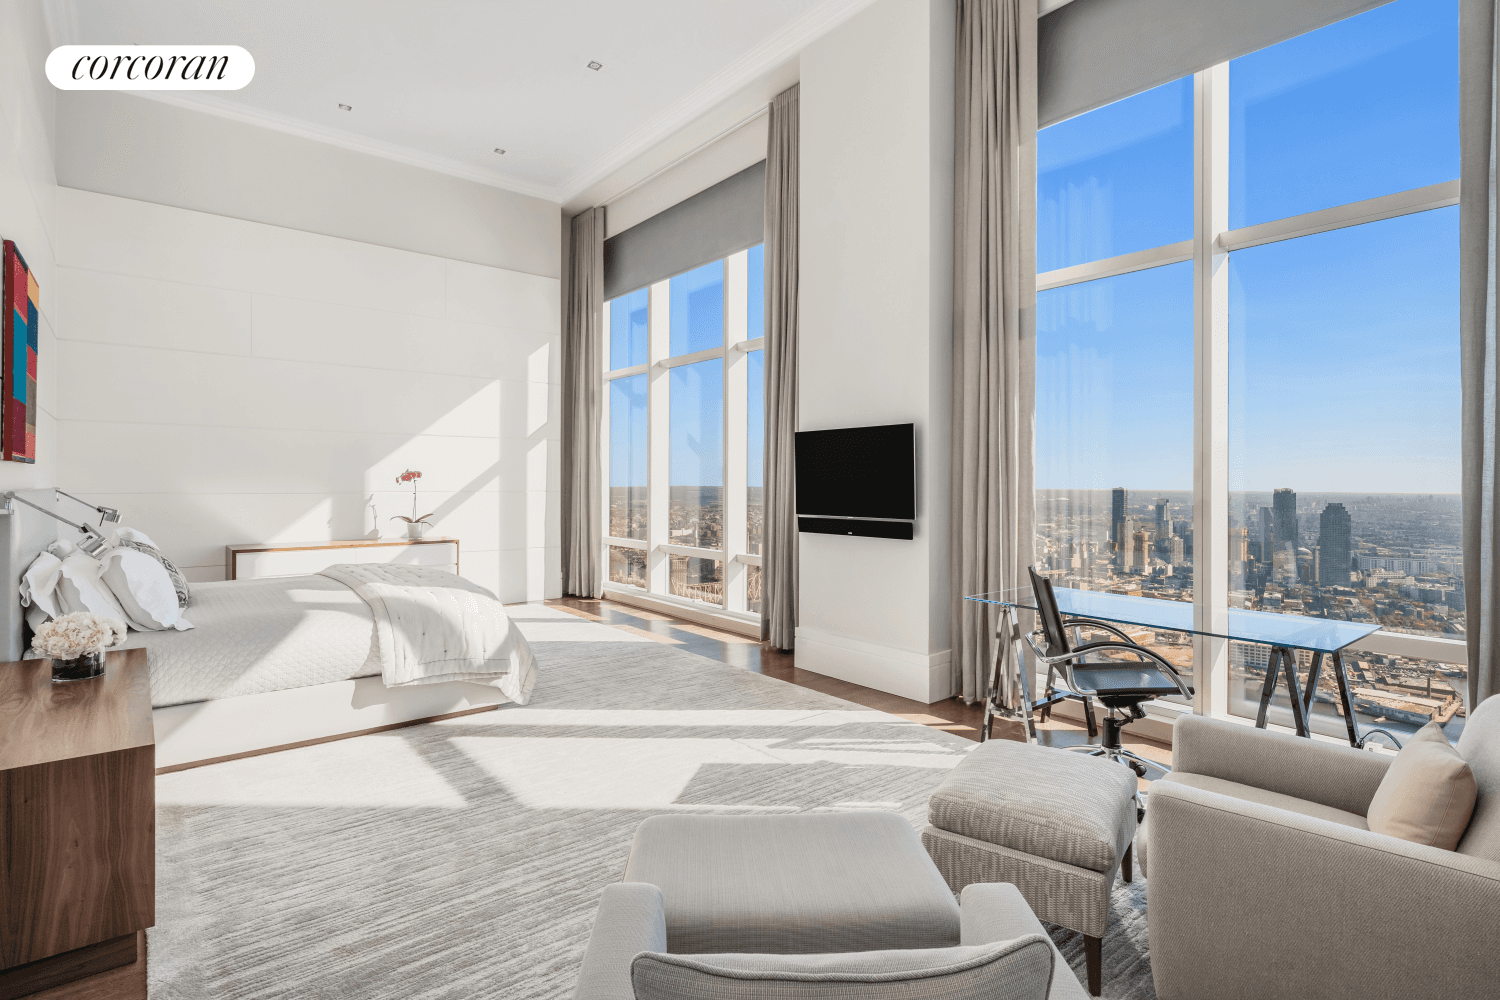 Spectacular designer renovated 4 bedroom PH residence spanning 5, 380SF at 845 UN Plaza with the most incredible Manhattan skyline views.